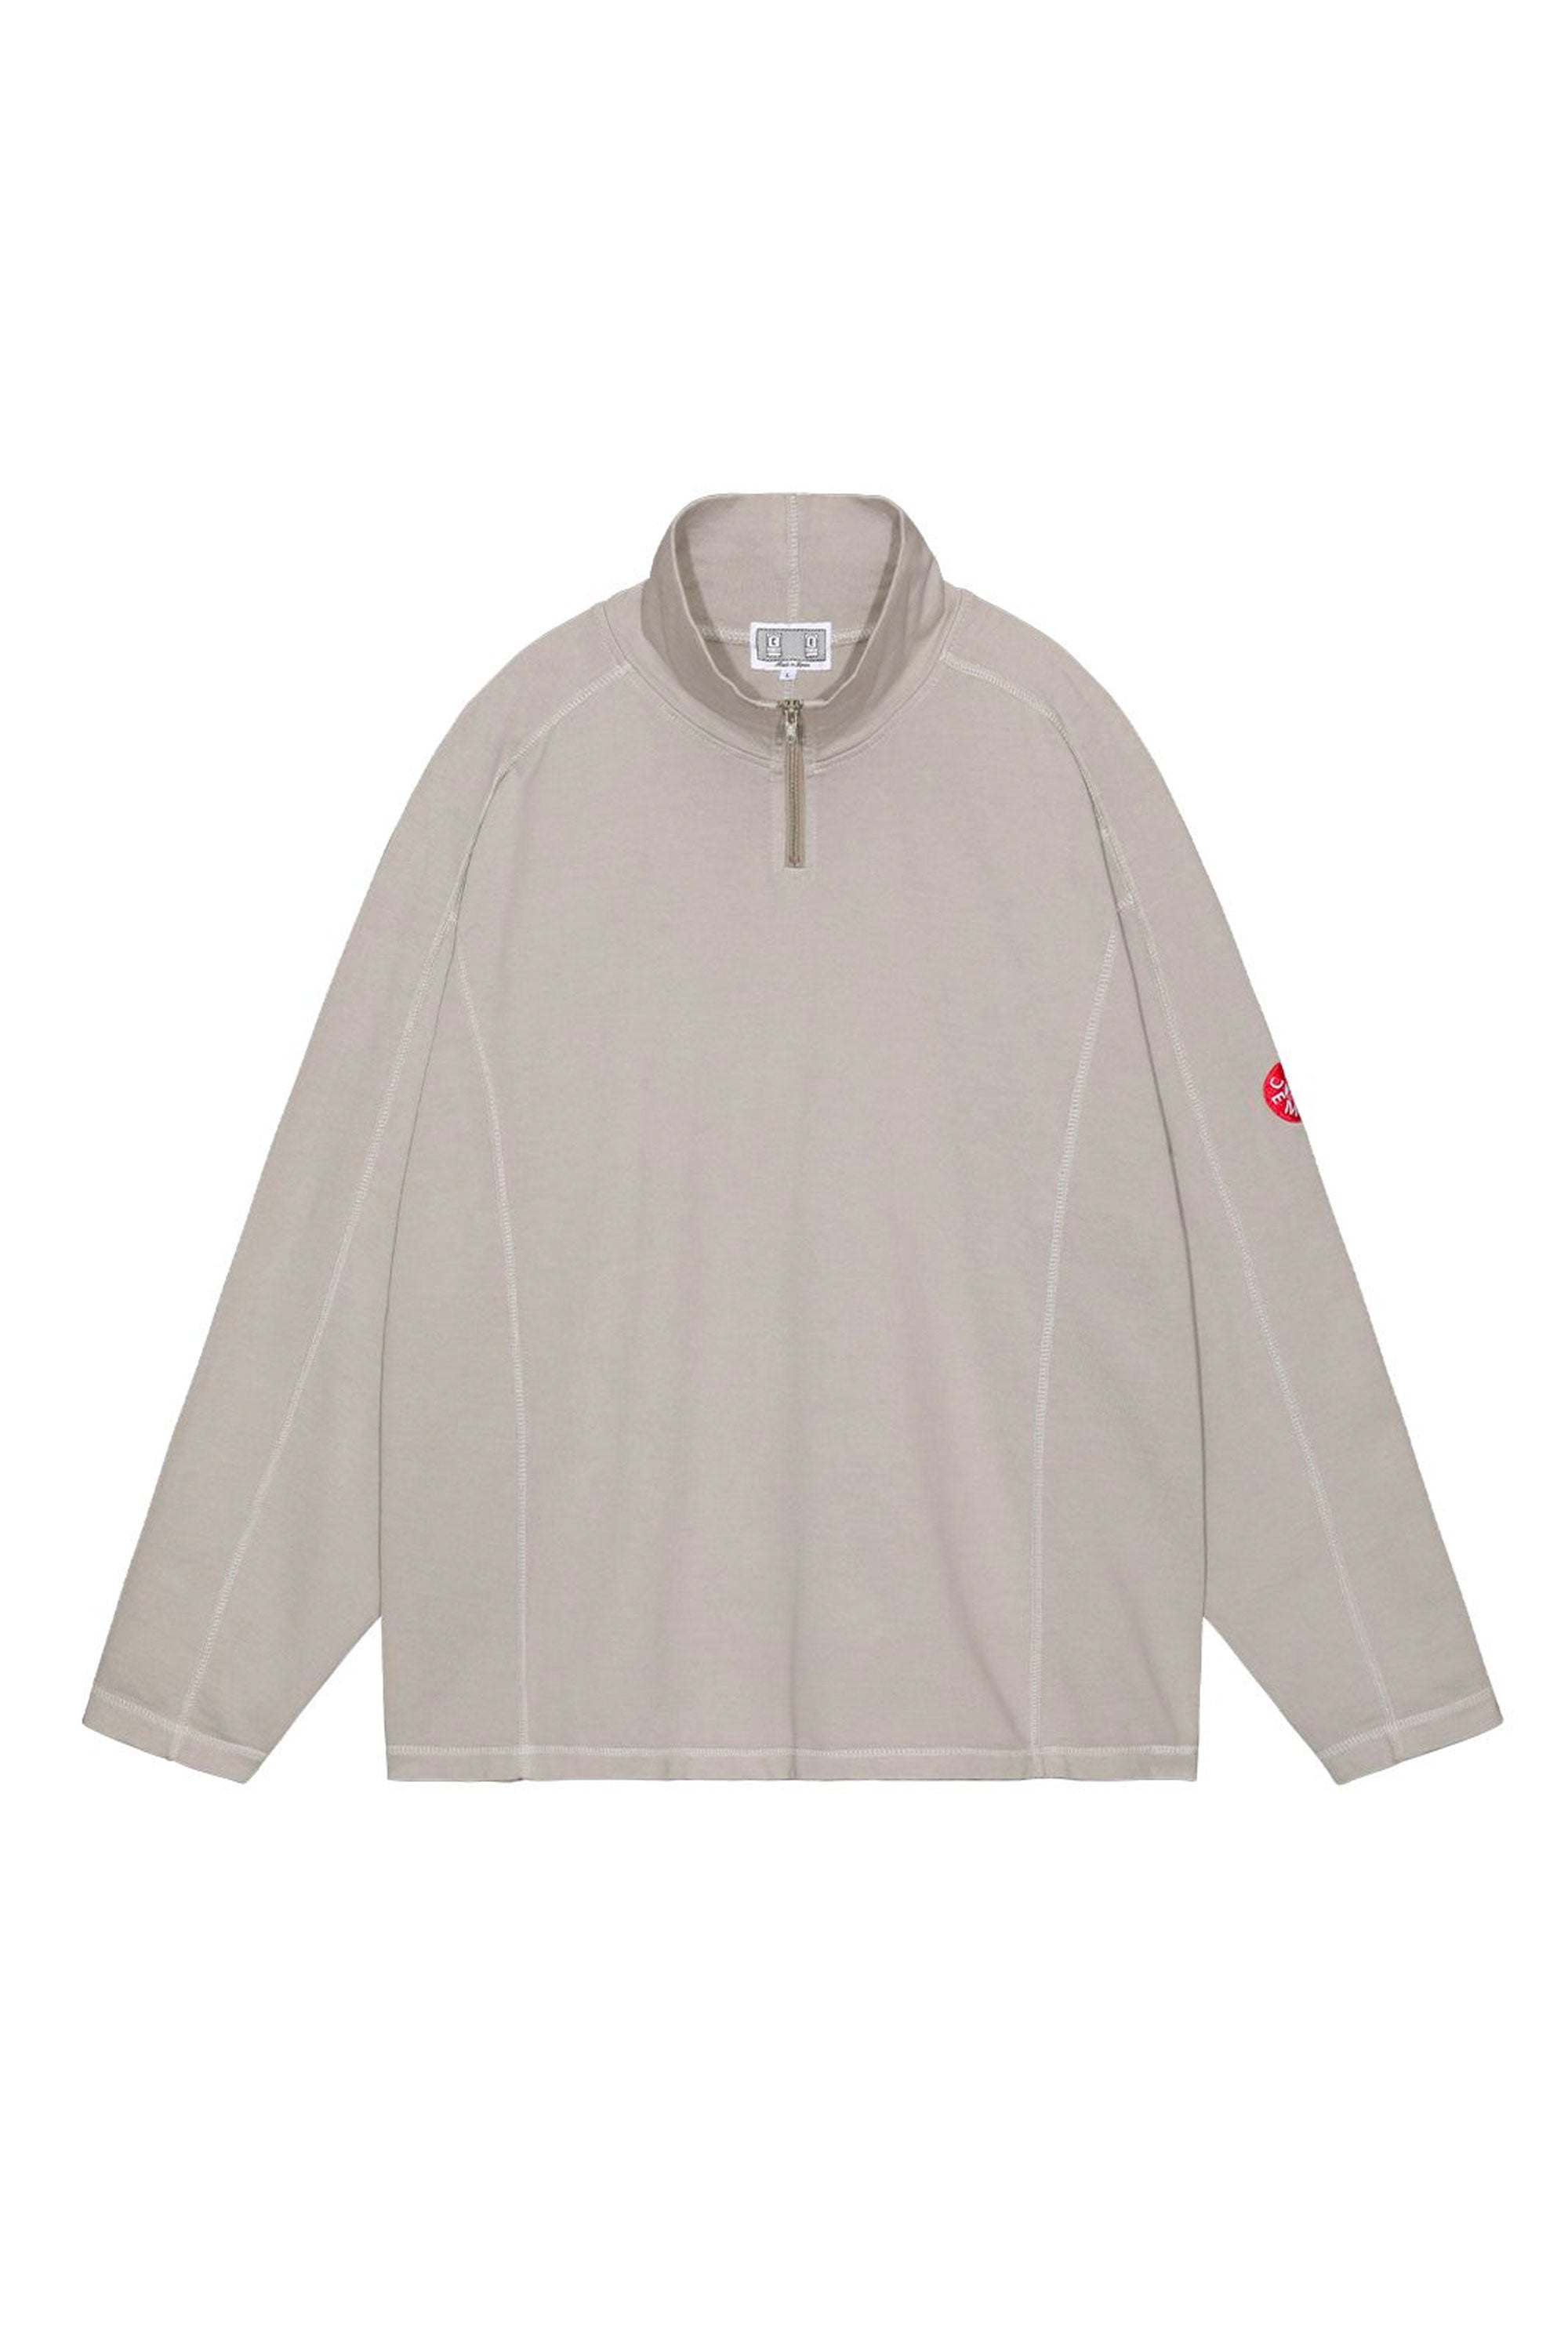 The CAV EMPT - OVERDYE HALF ZIP TURTLE LONG SLEEVE T GREY available online with global shipping, and in PAM Stores Melbourne and Sydney.